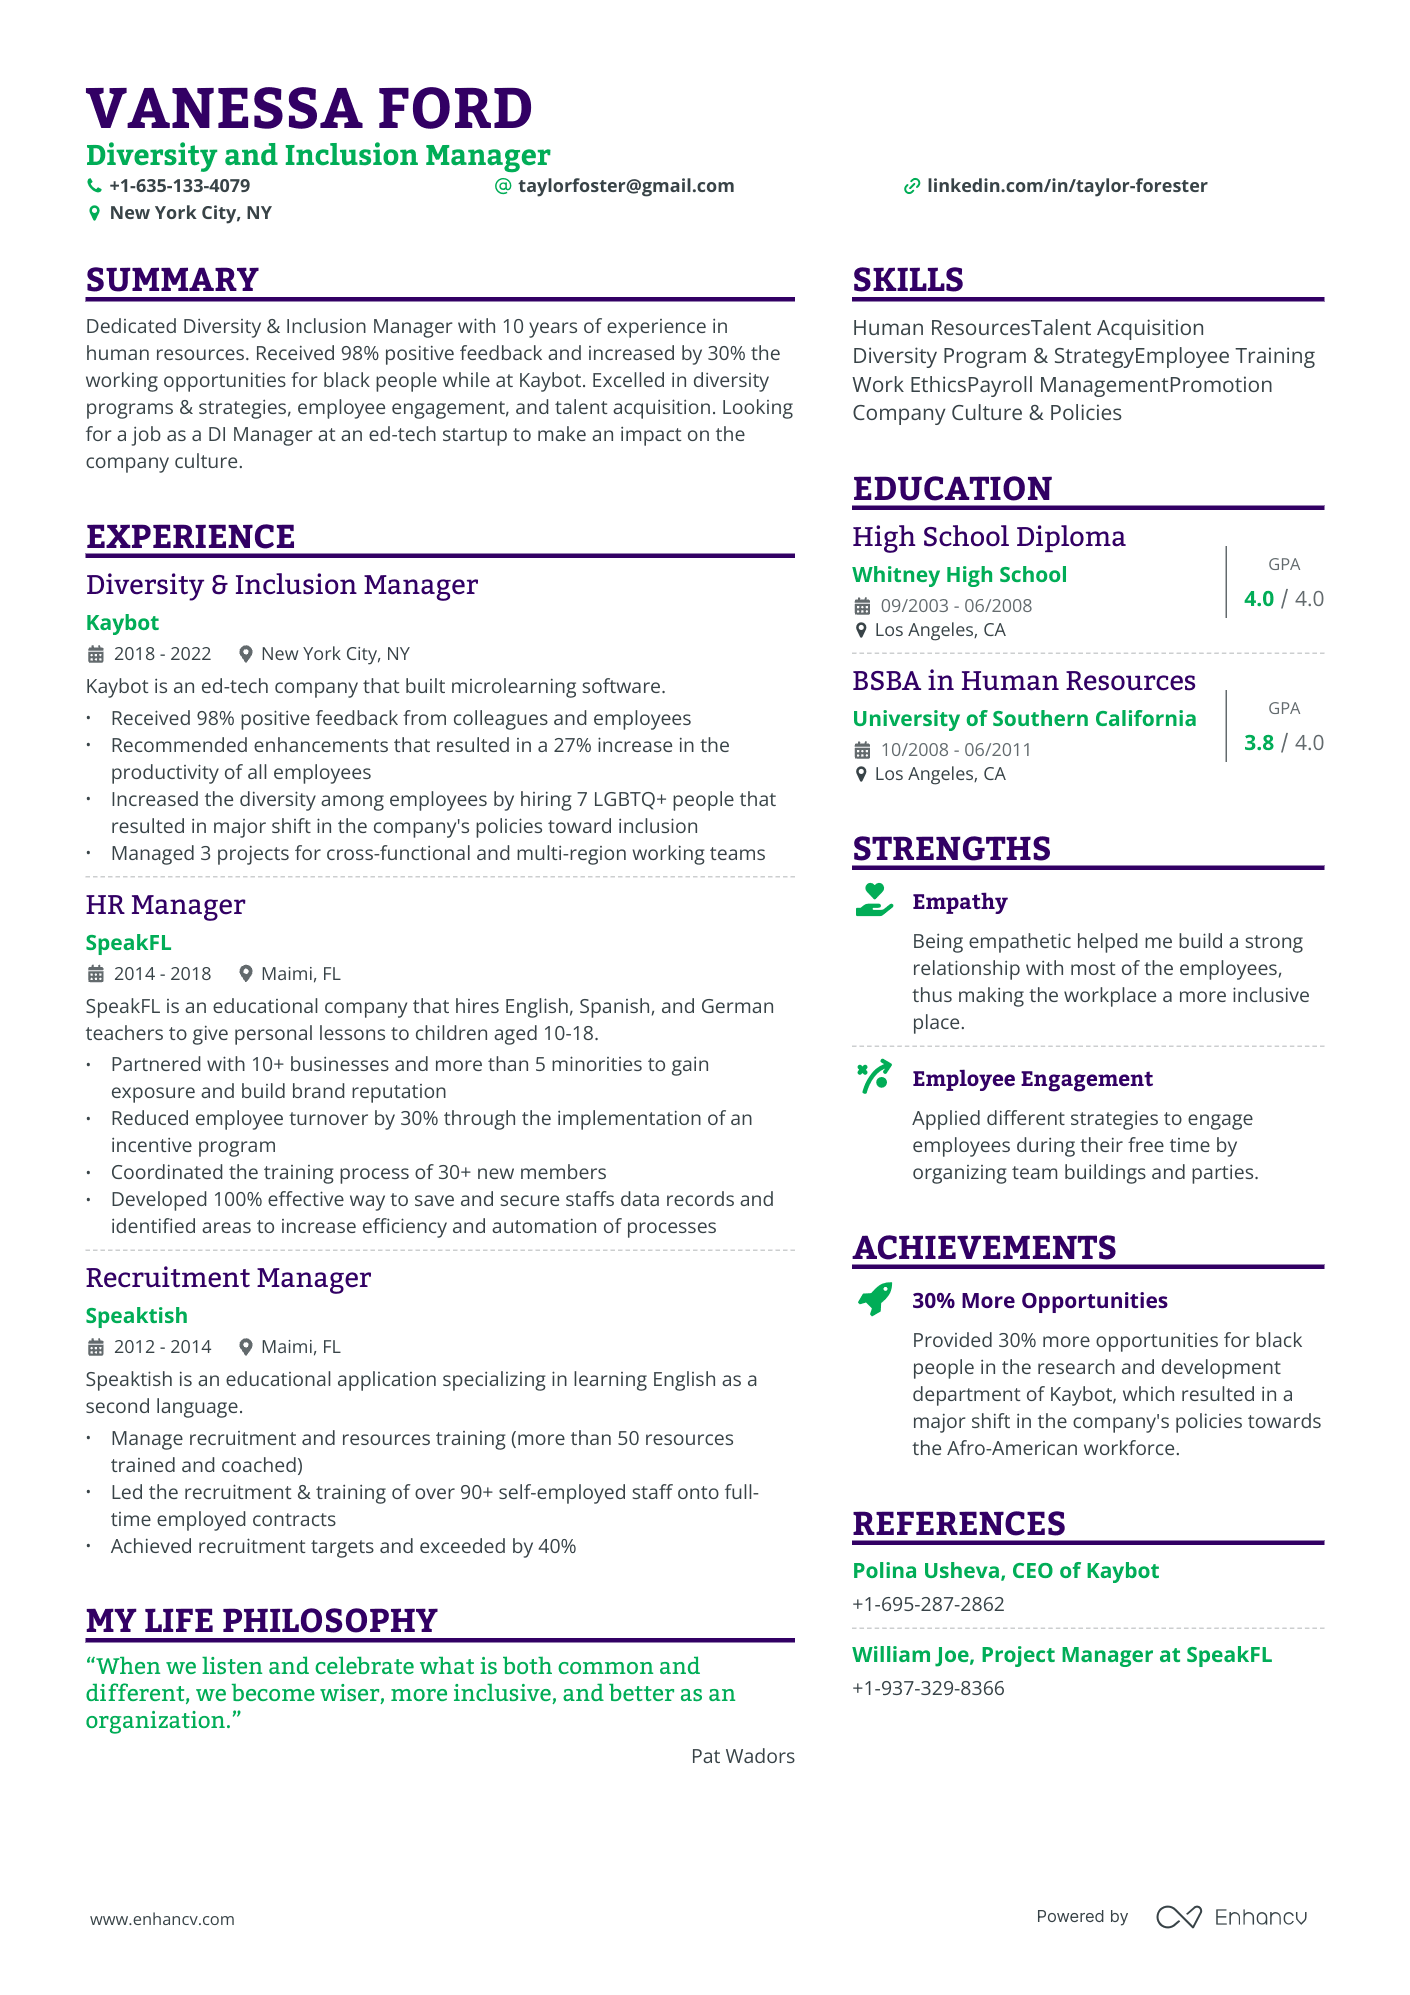 Diversity And Inclusion Manager resume example